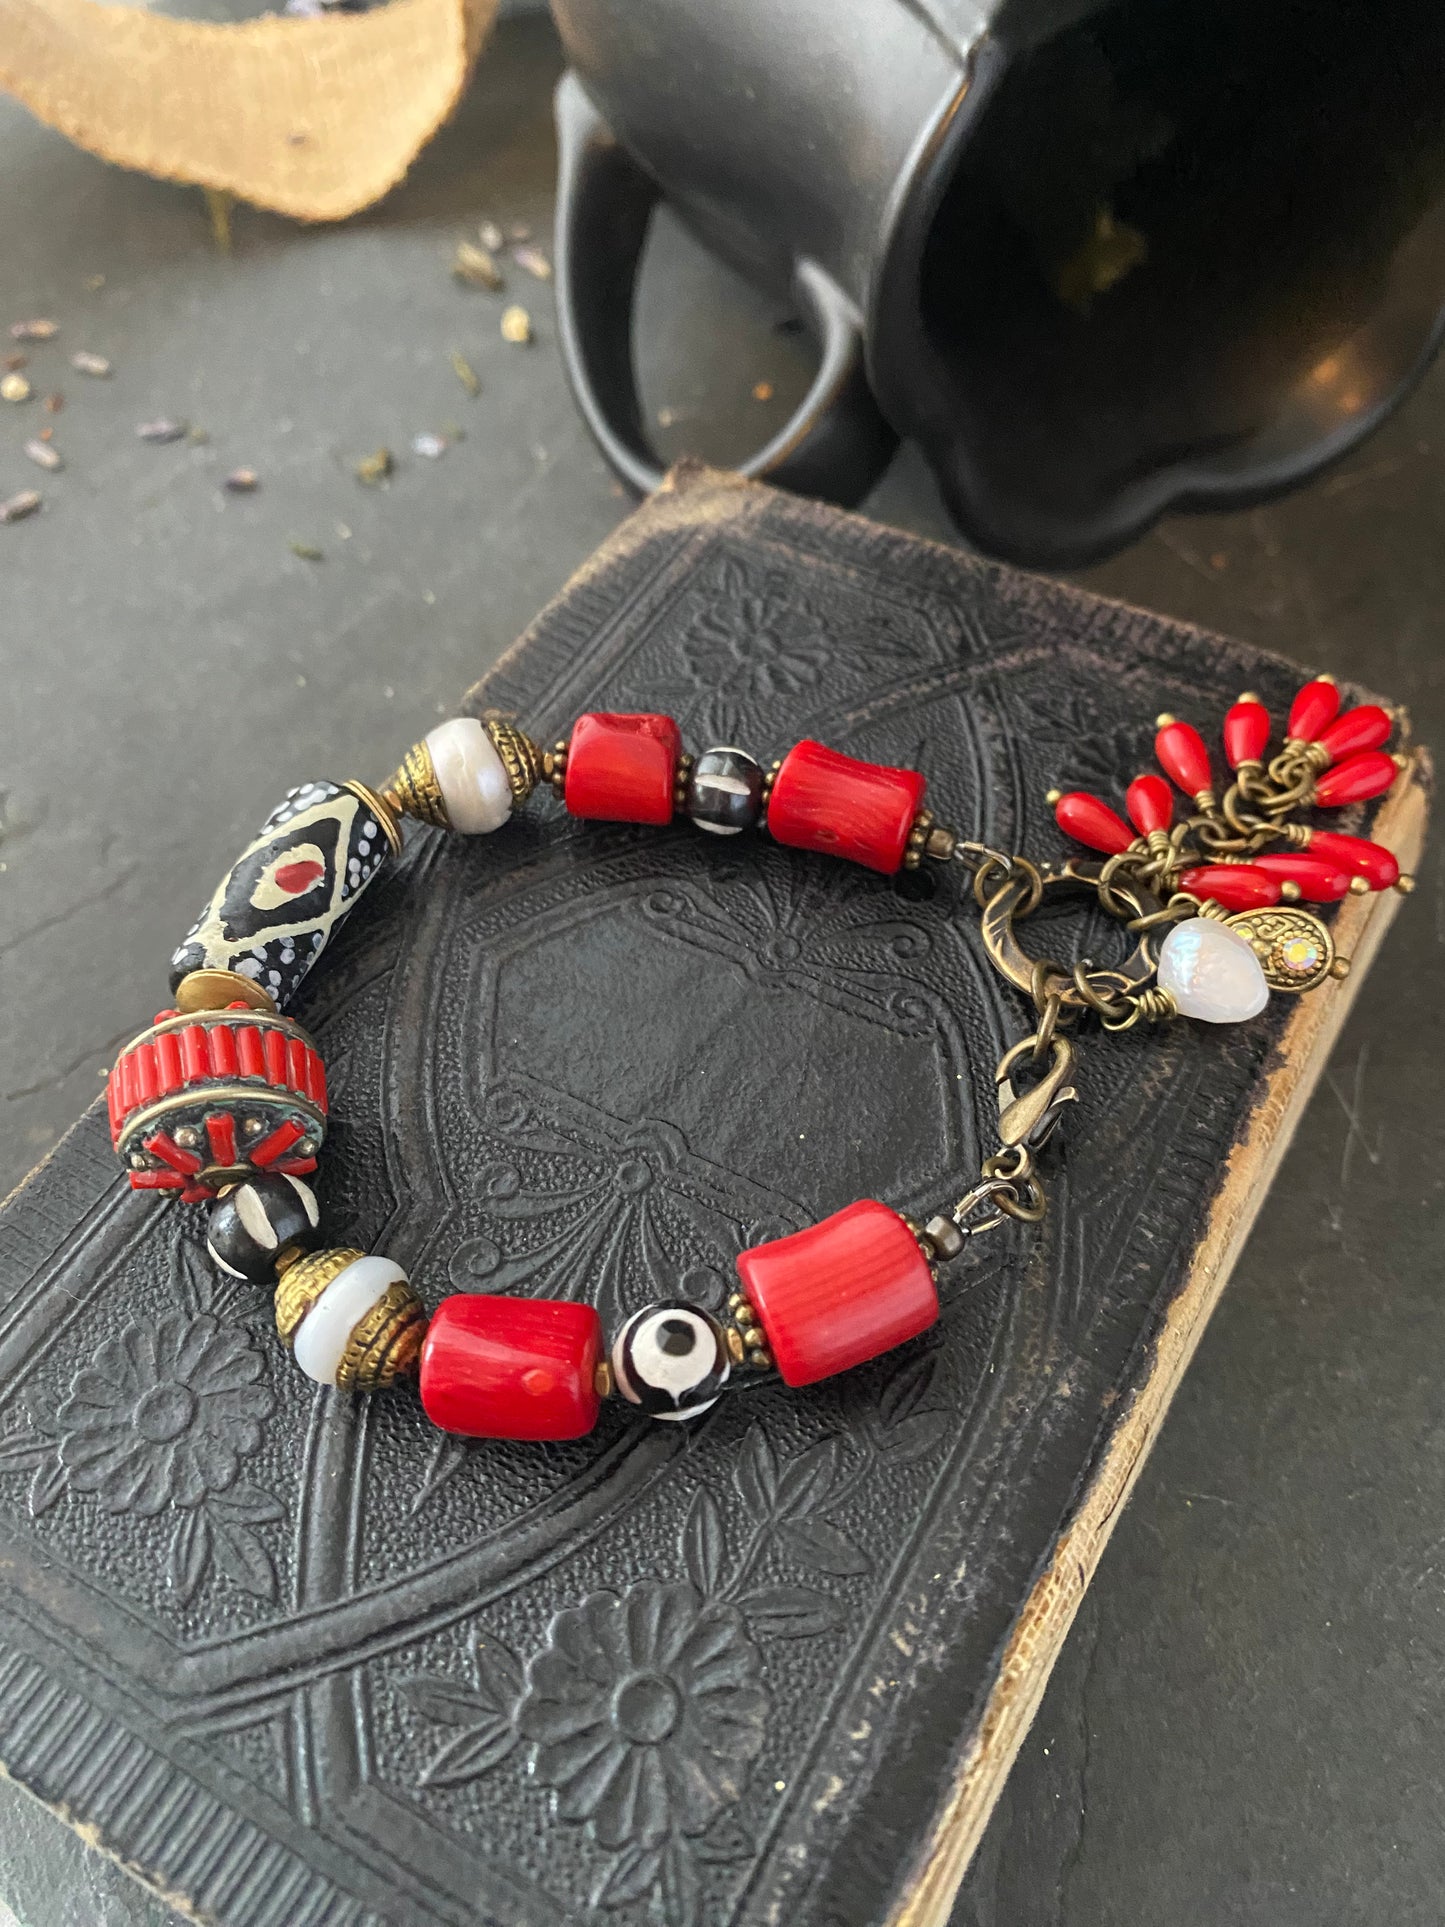 Red coral, pearl, African glass, agate, bronze metal, bracelet